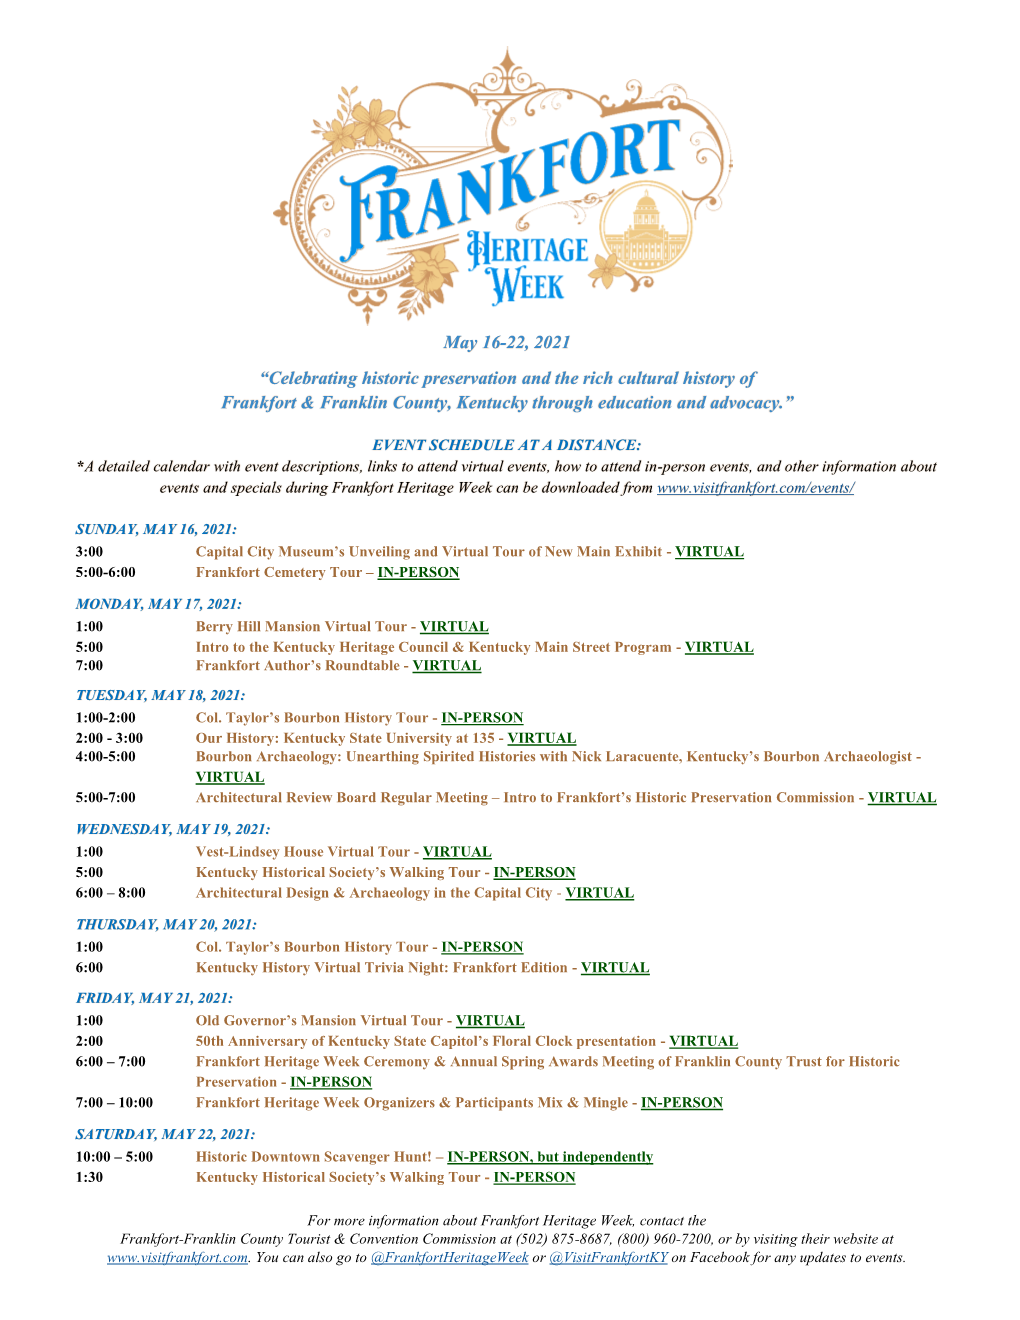 Celebrating Historic Preservation and the Rich Cultural History of Frankfort & Franklin County, Kentucky Through Education and Advocacy.”